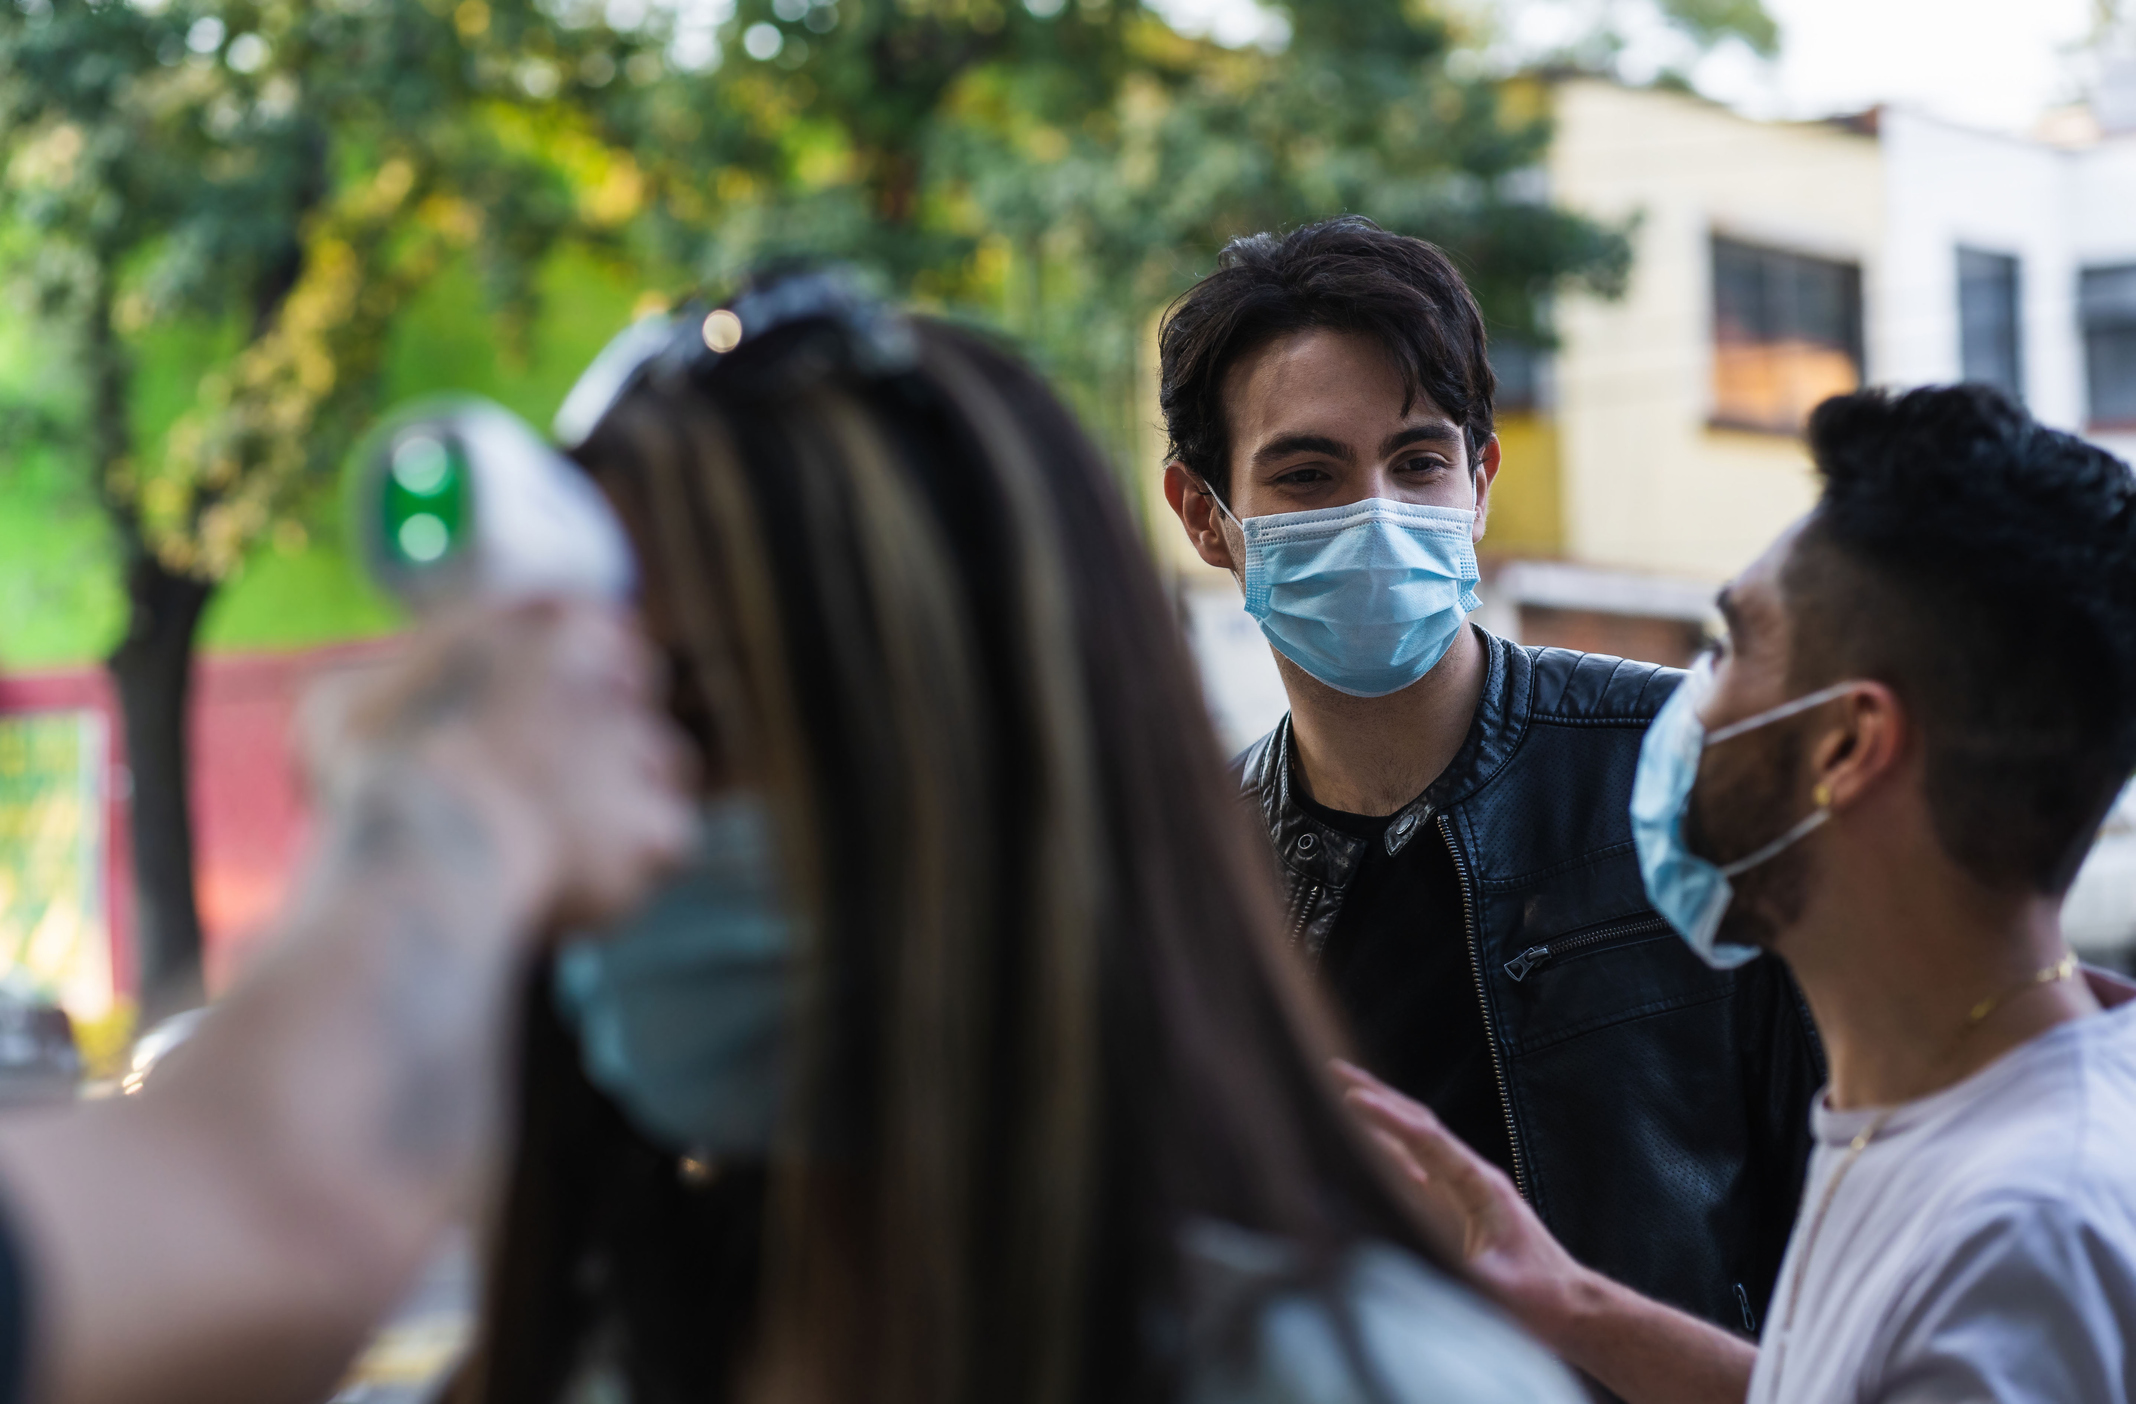 Latin American man hanging out with friends wearing masks during the COVID-10 pandemic.